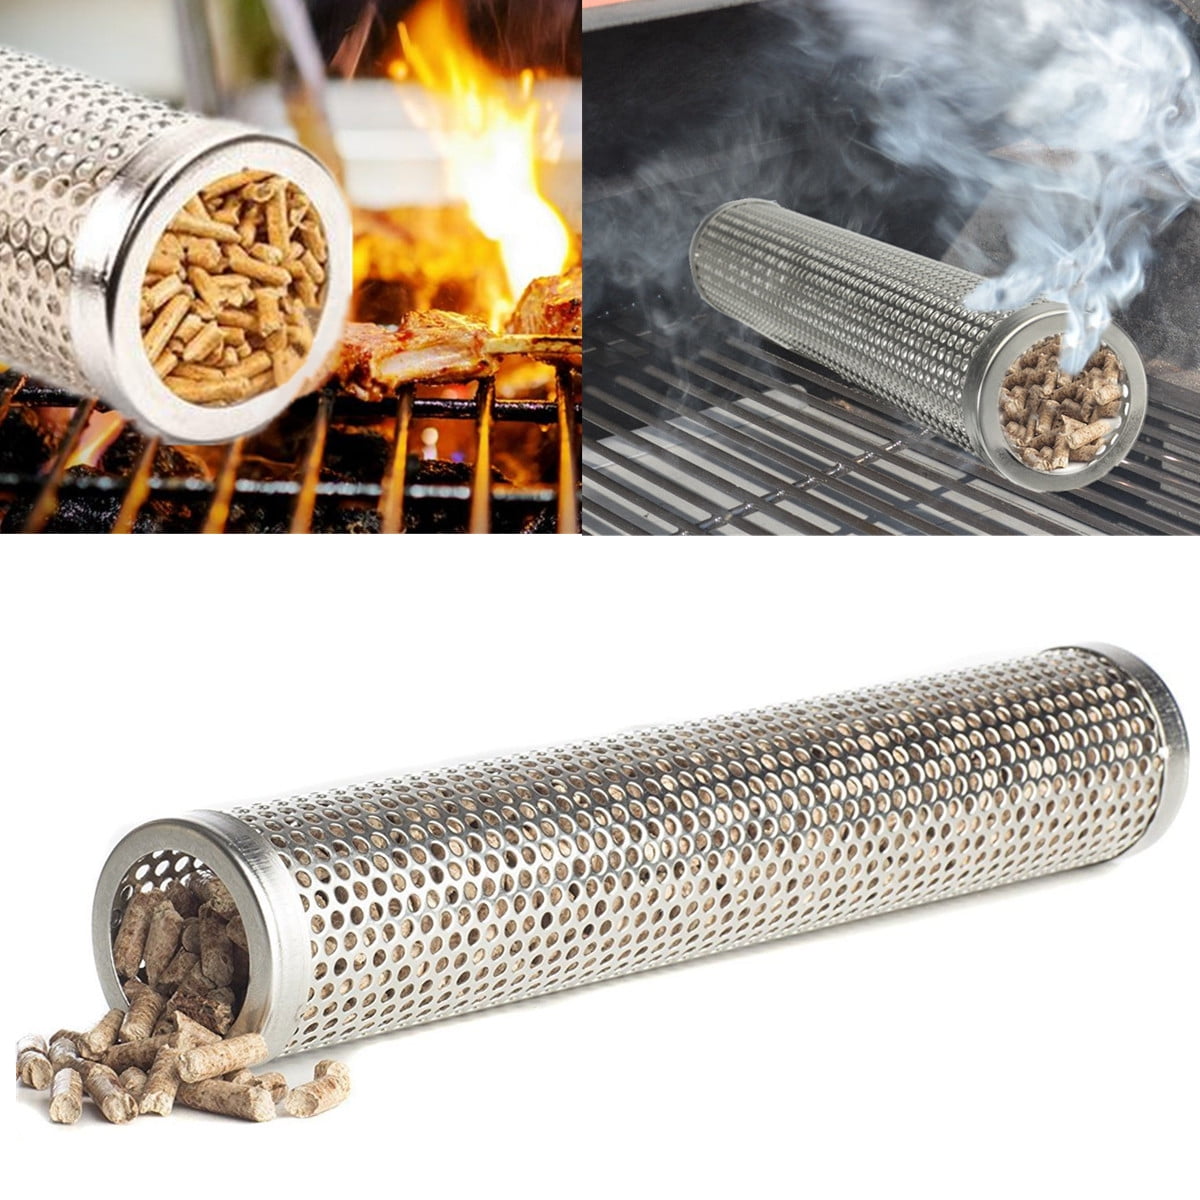 Fdit Smoker Tube 2Pcs BBQ Grill Smoker Tube Mesh Tube Pellets Smoke Box 6in Stainless Steel Barbecue Accessory for Electric Gas Charcoal 2#